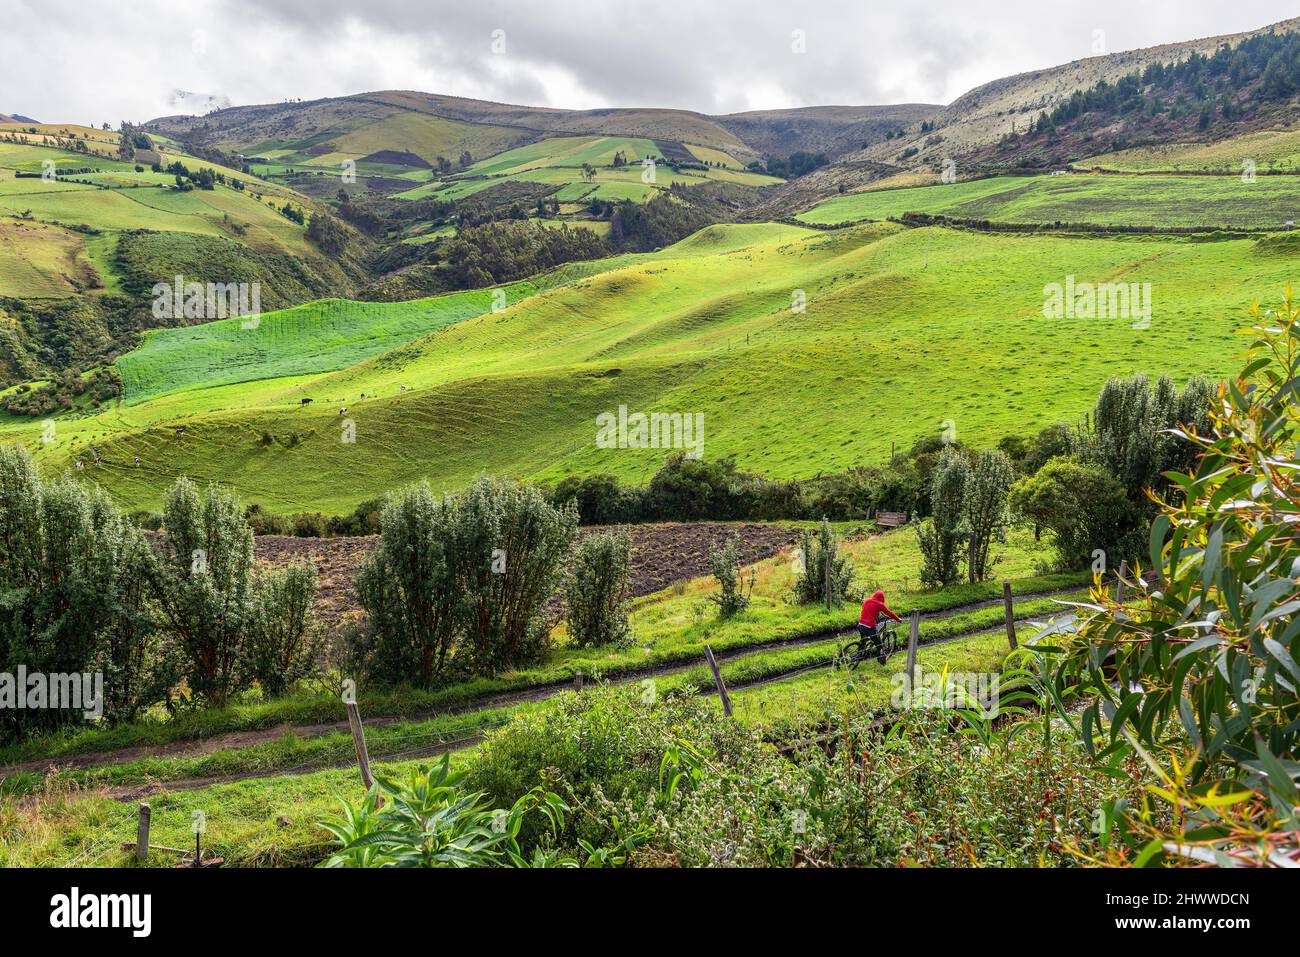 Man on bycicle on country road with green fields, hills and cows, Cayambe Coca national park, Ecuador. Stock Photo